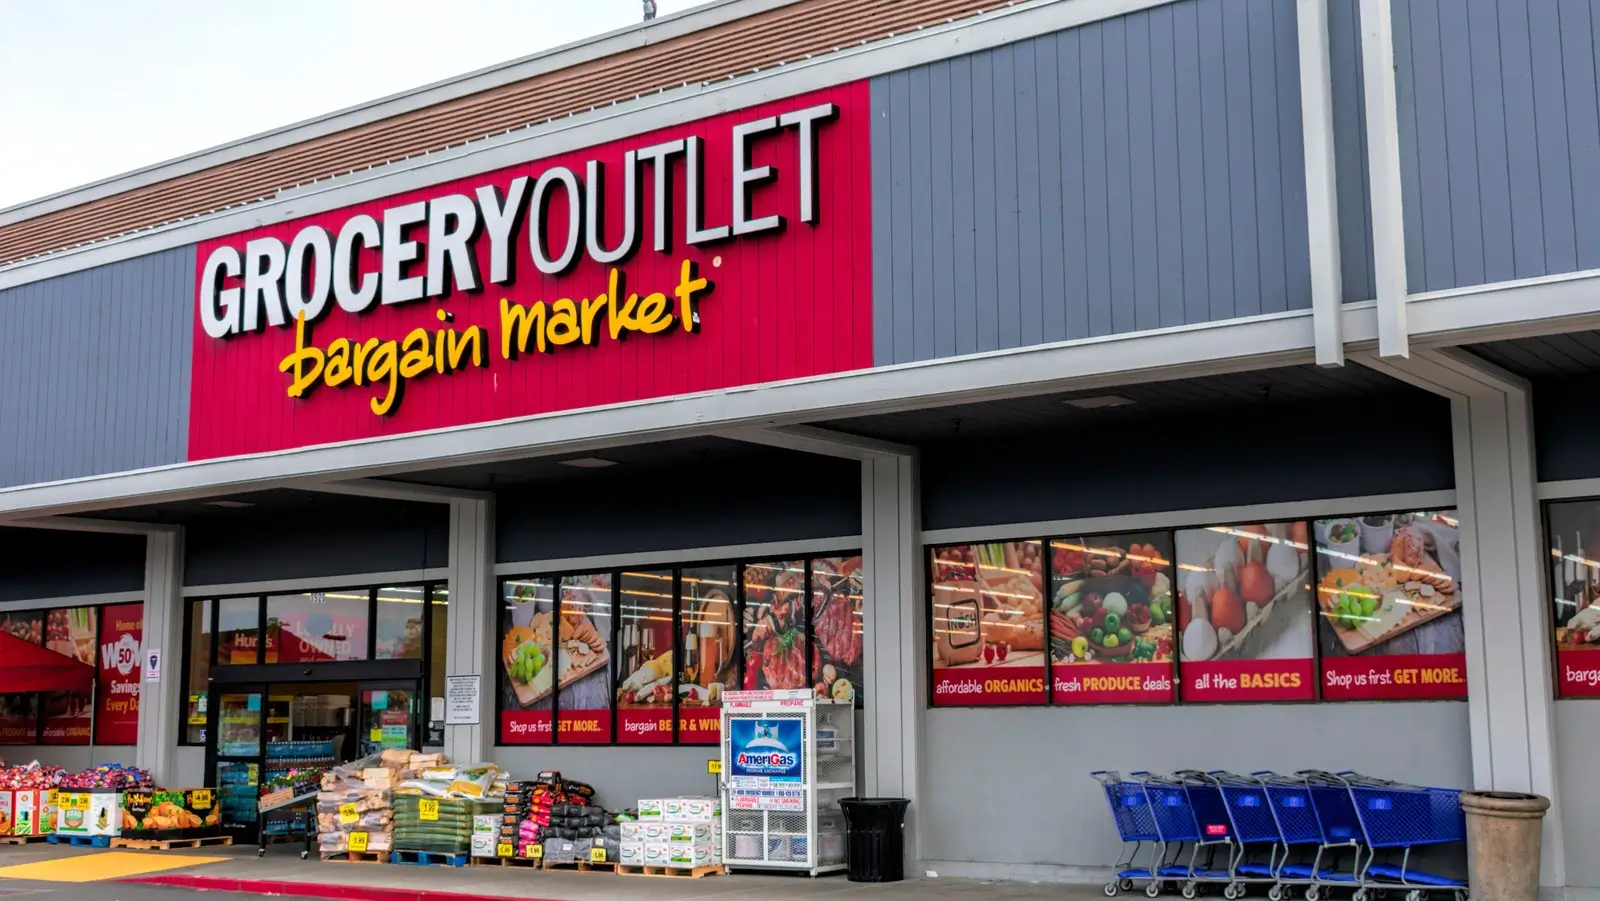 Groceries Outlet Hours - Find Grocery Outlet Near Me Location - store-hour.com